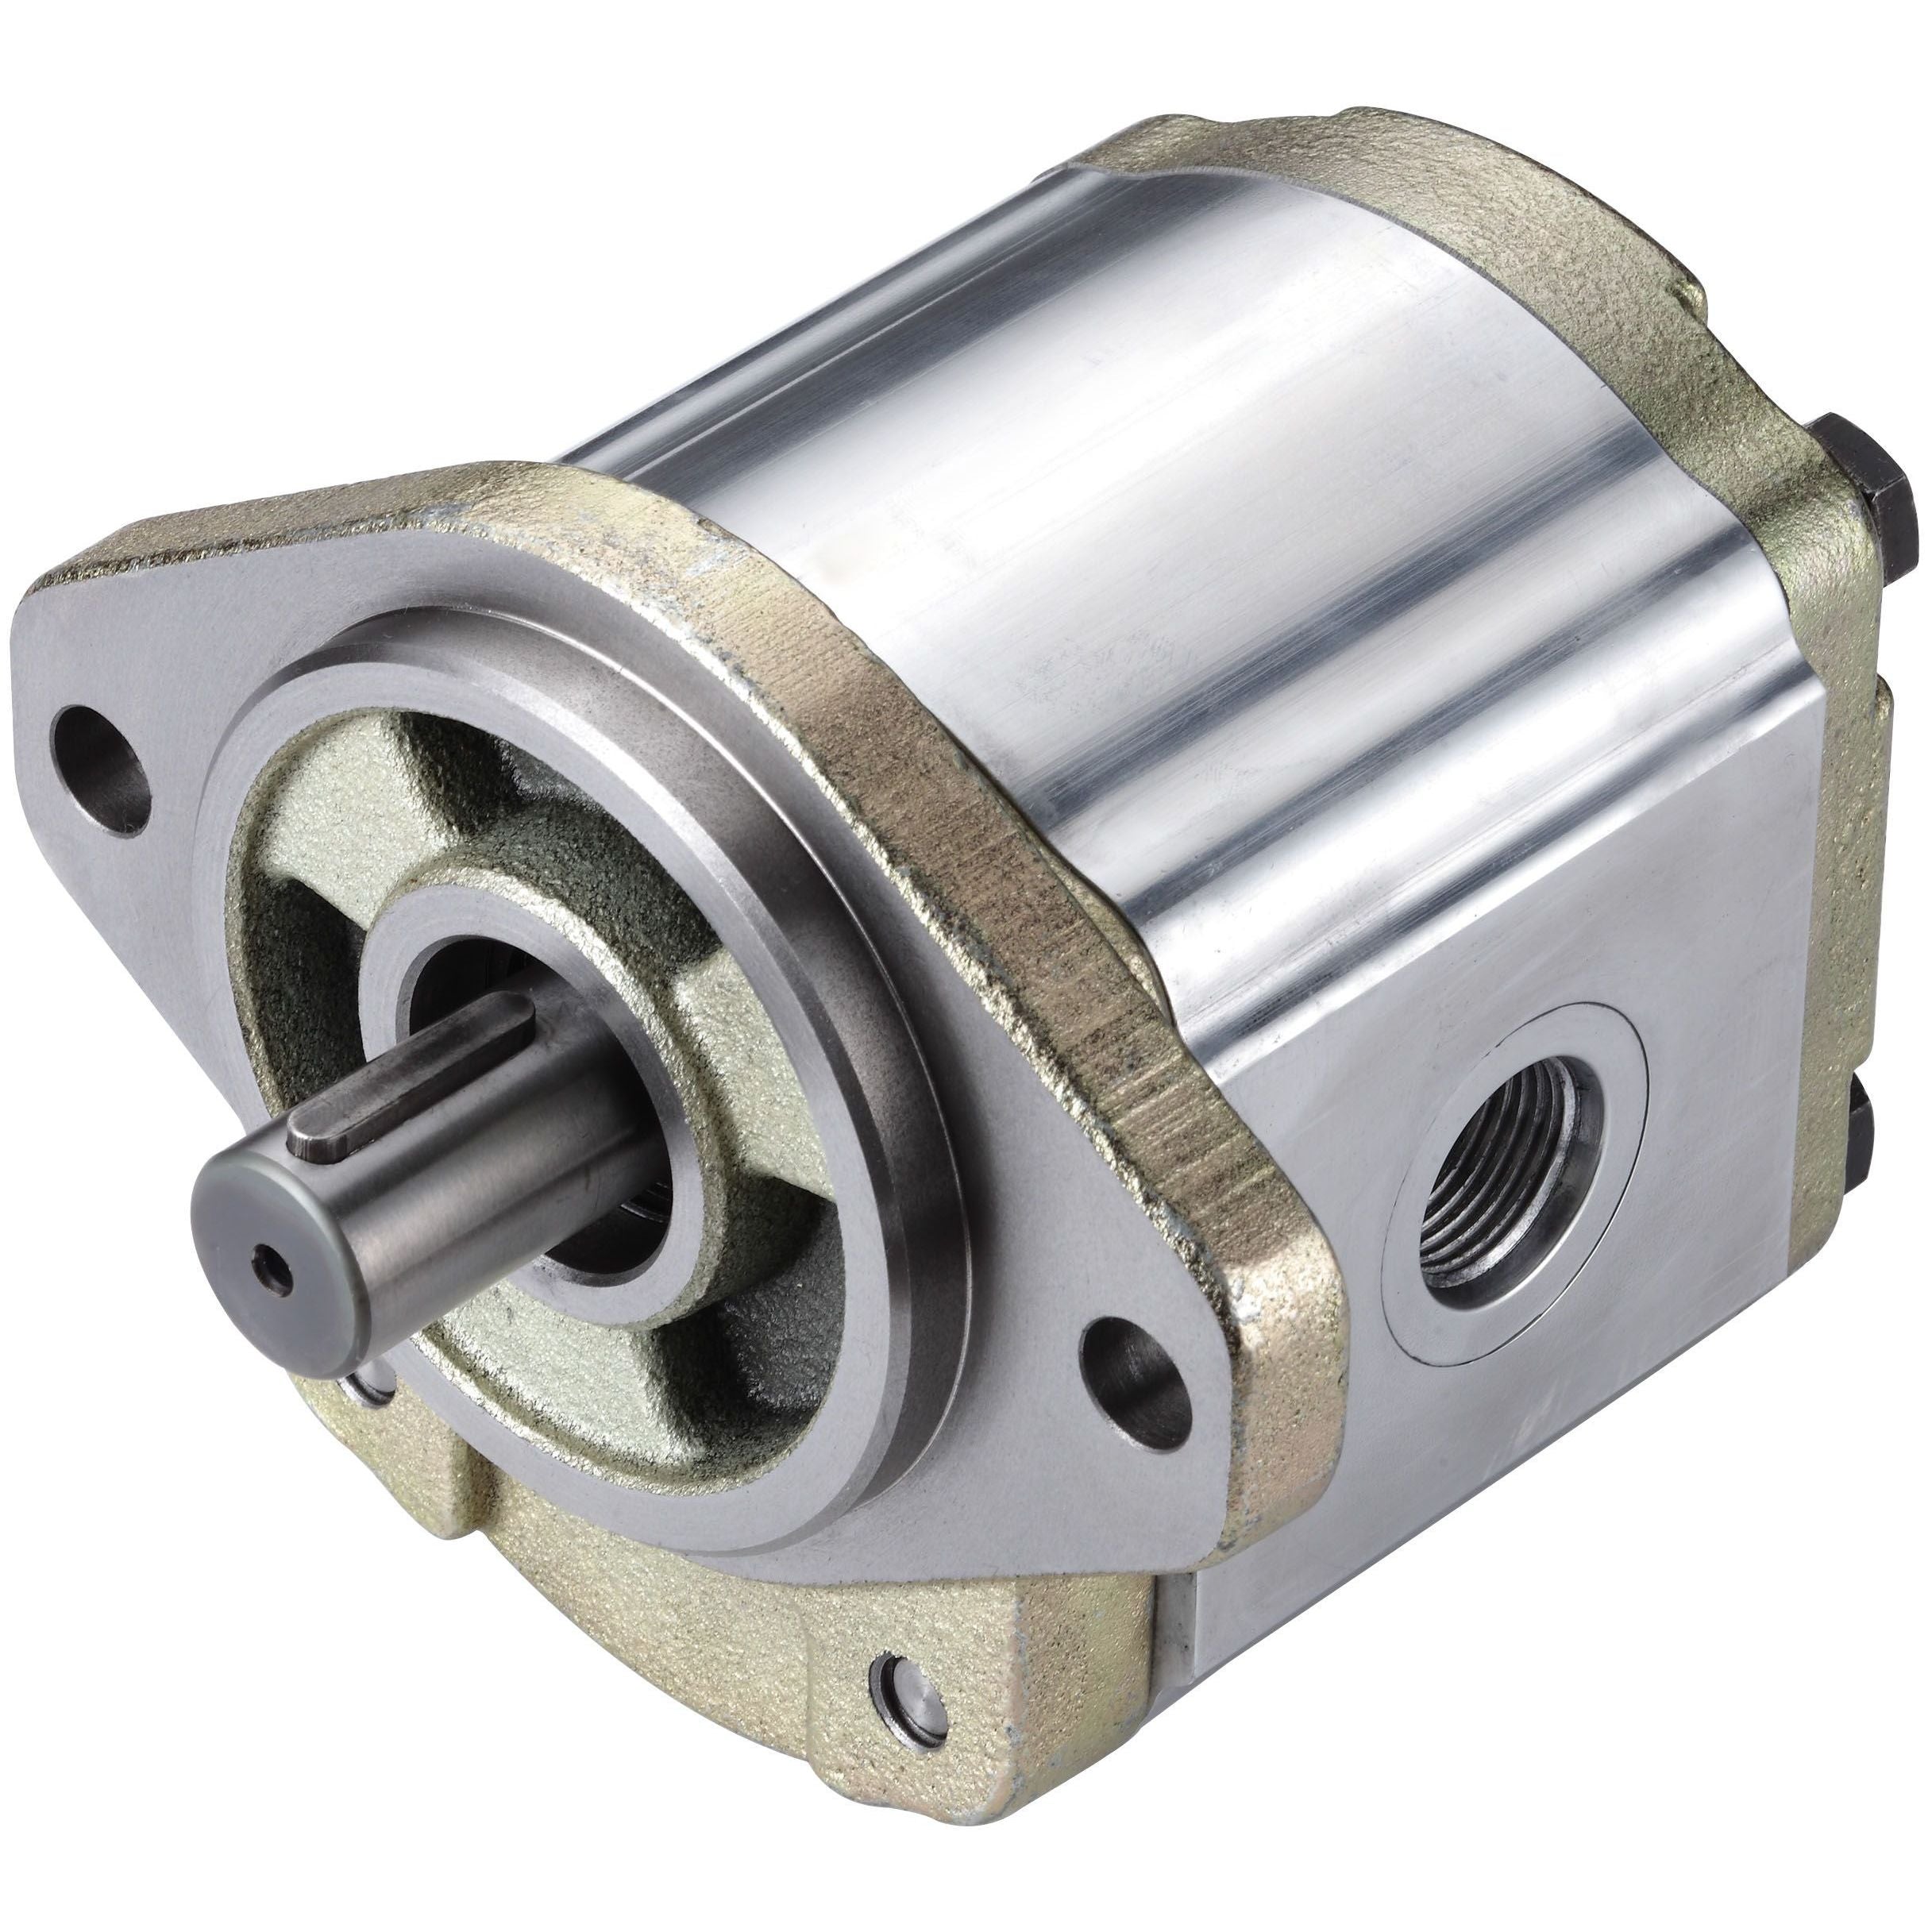 3GB8U280R : Honor Gear Pump, CW Rotation, 80cc (4.88in3), 38.04 GPM, 2100psi, 2300 RPM, #20 SAE (1.25") In, #12 SAE (3/4") Out, Splined Shaft 13-Tooth, 16/32 Pitch, SAE B 2-Bolt Mount